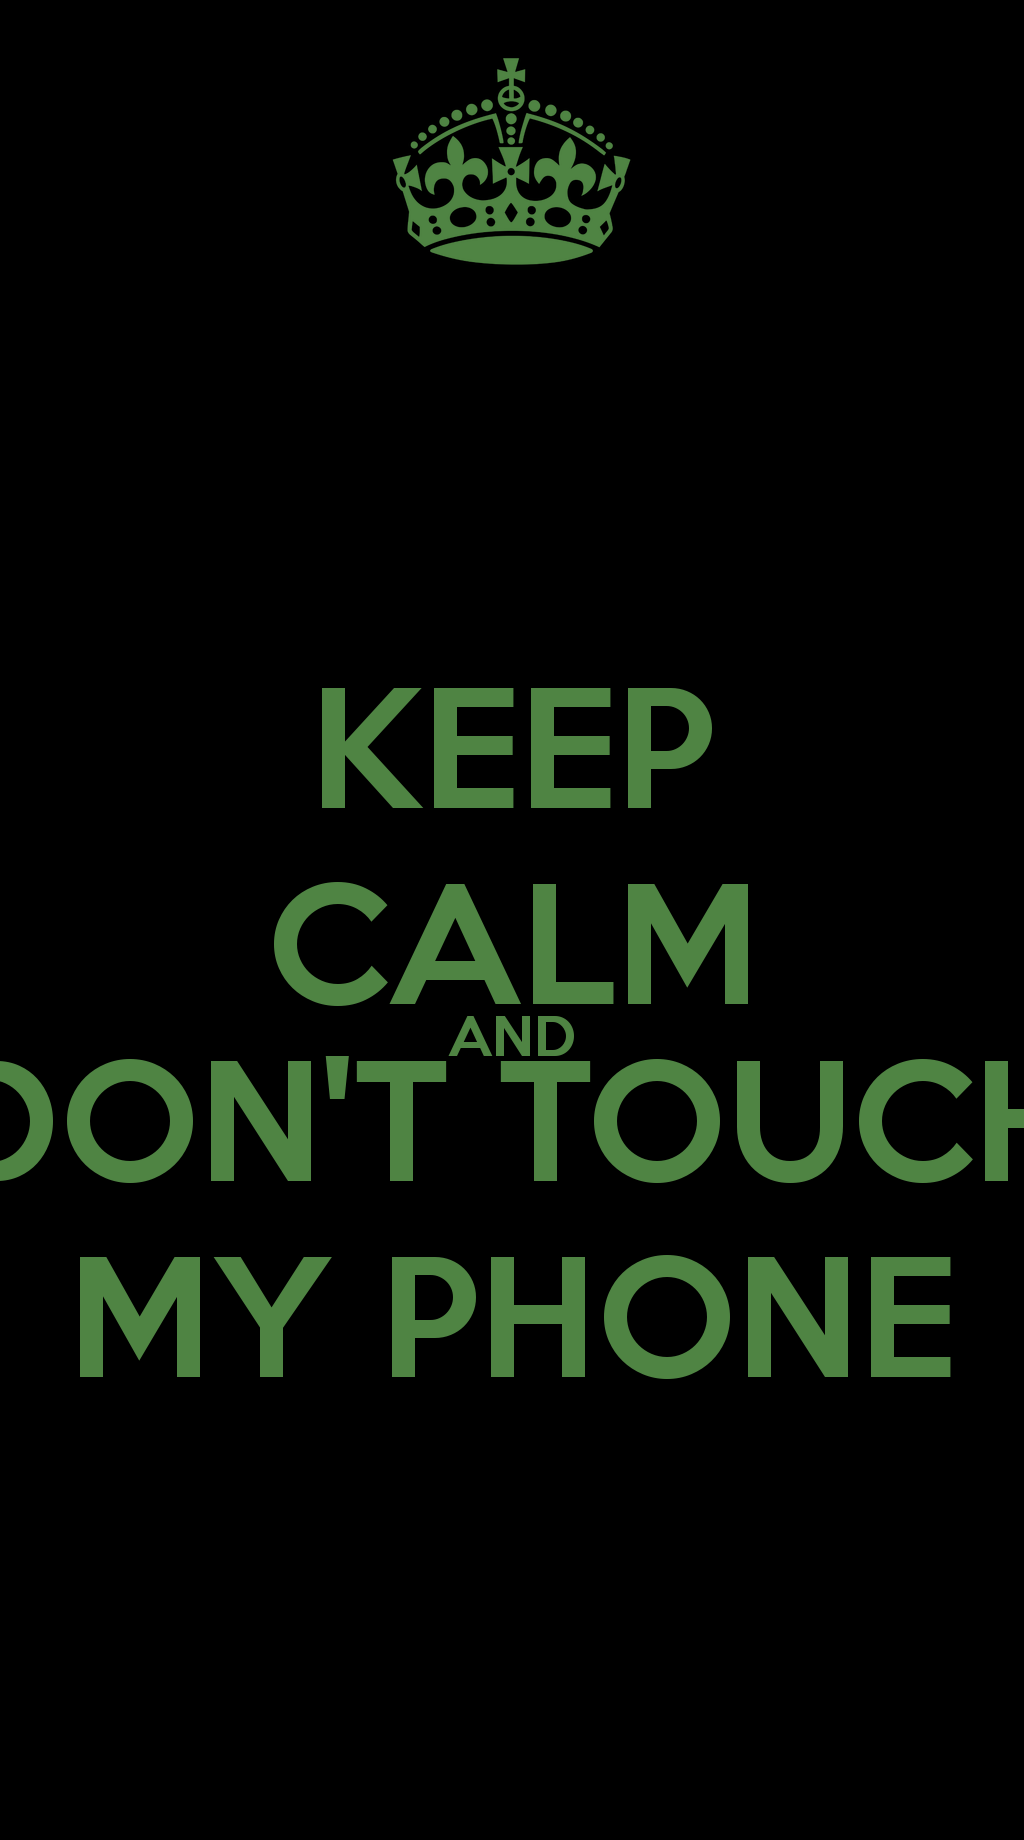 Dont Touch My Phone Wallpaper Free Download Group Picture